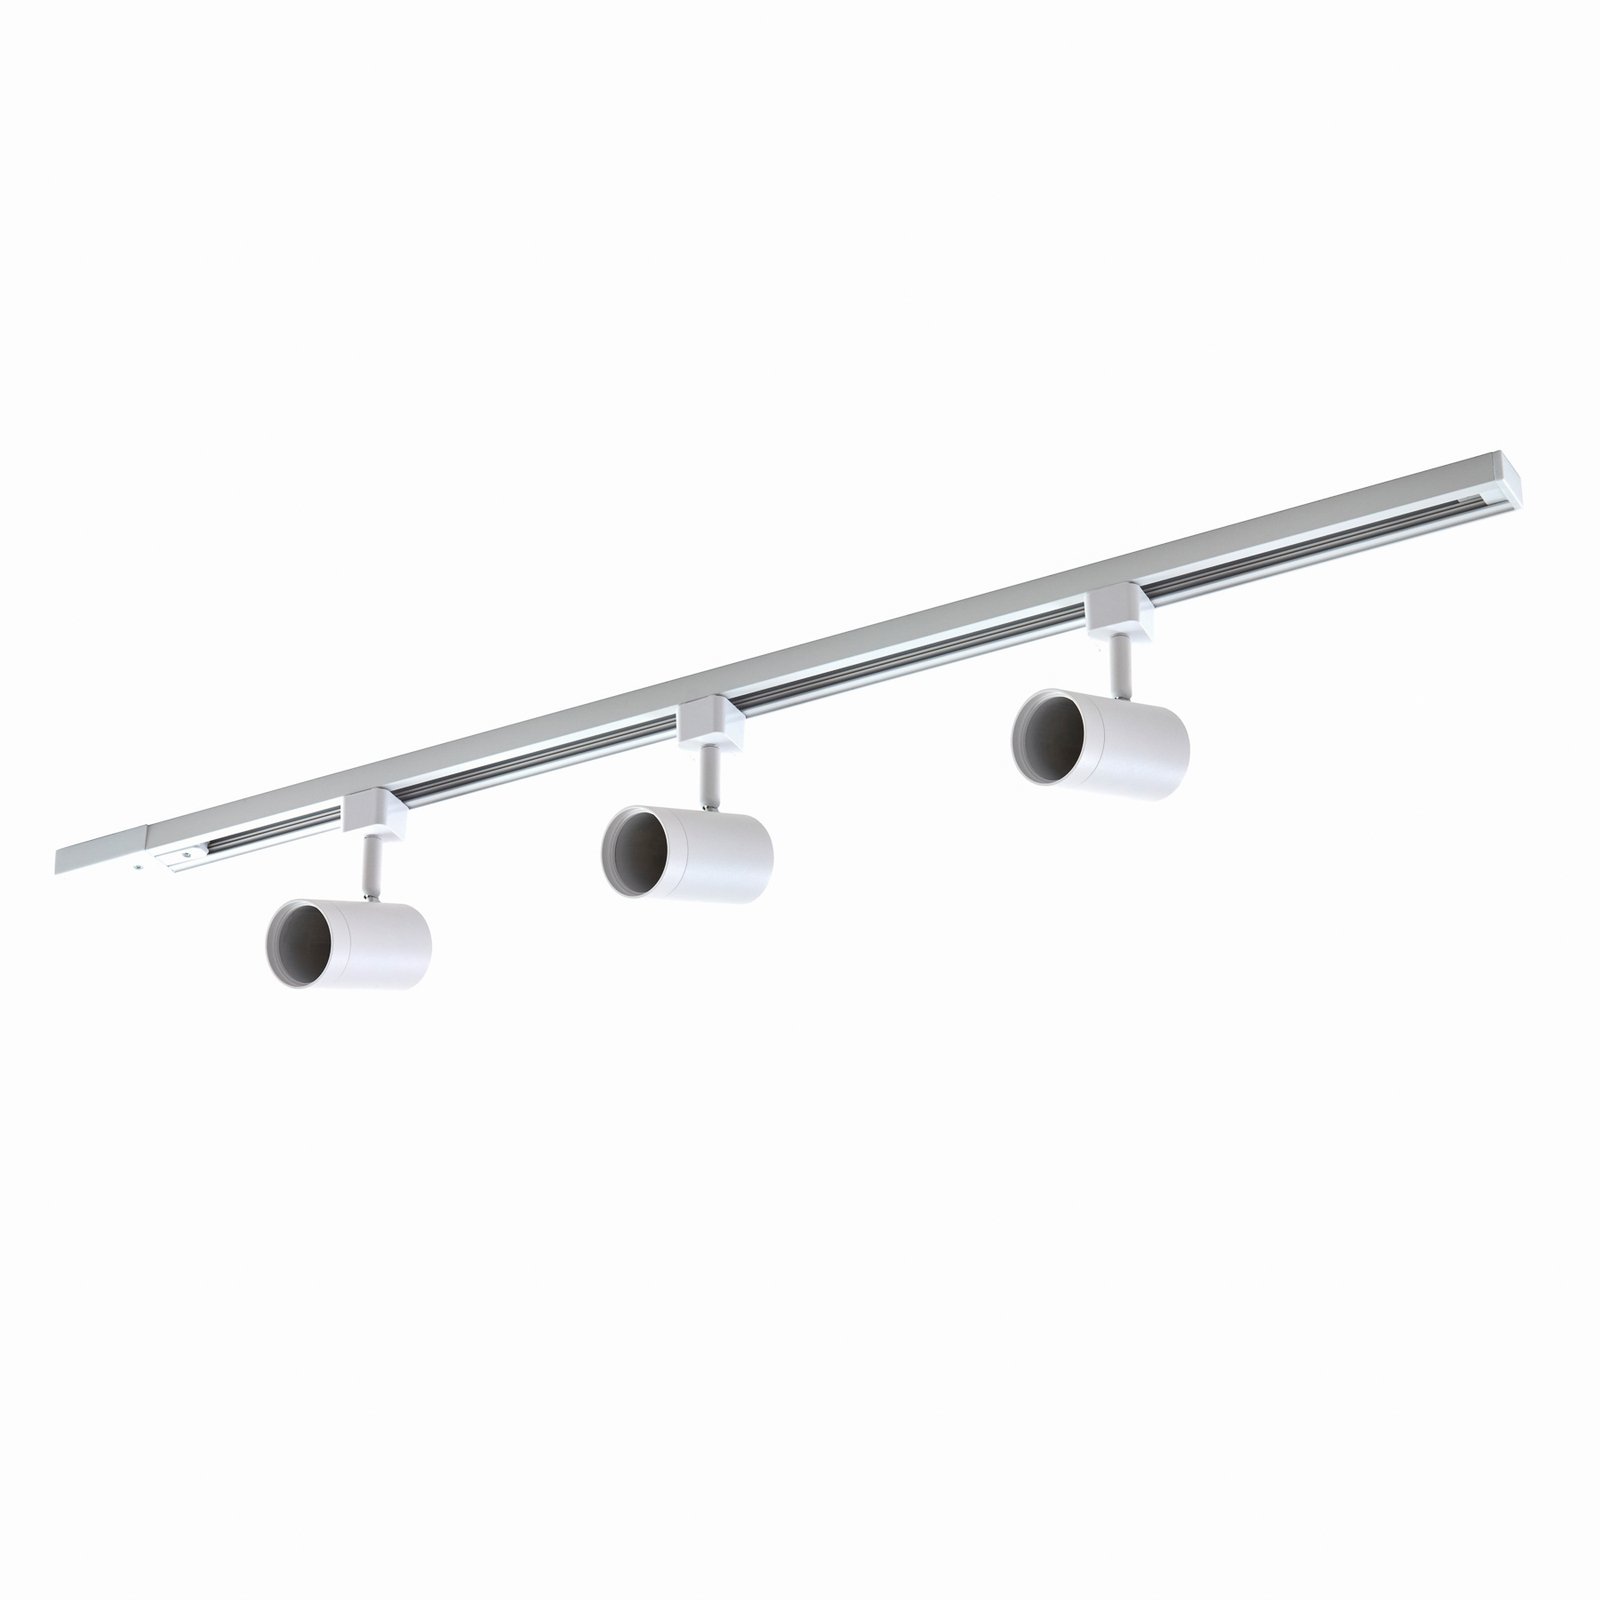 Prios Jorell 1-fase-railsysteem 3-lamps wit